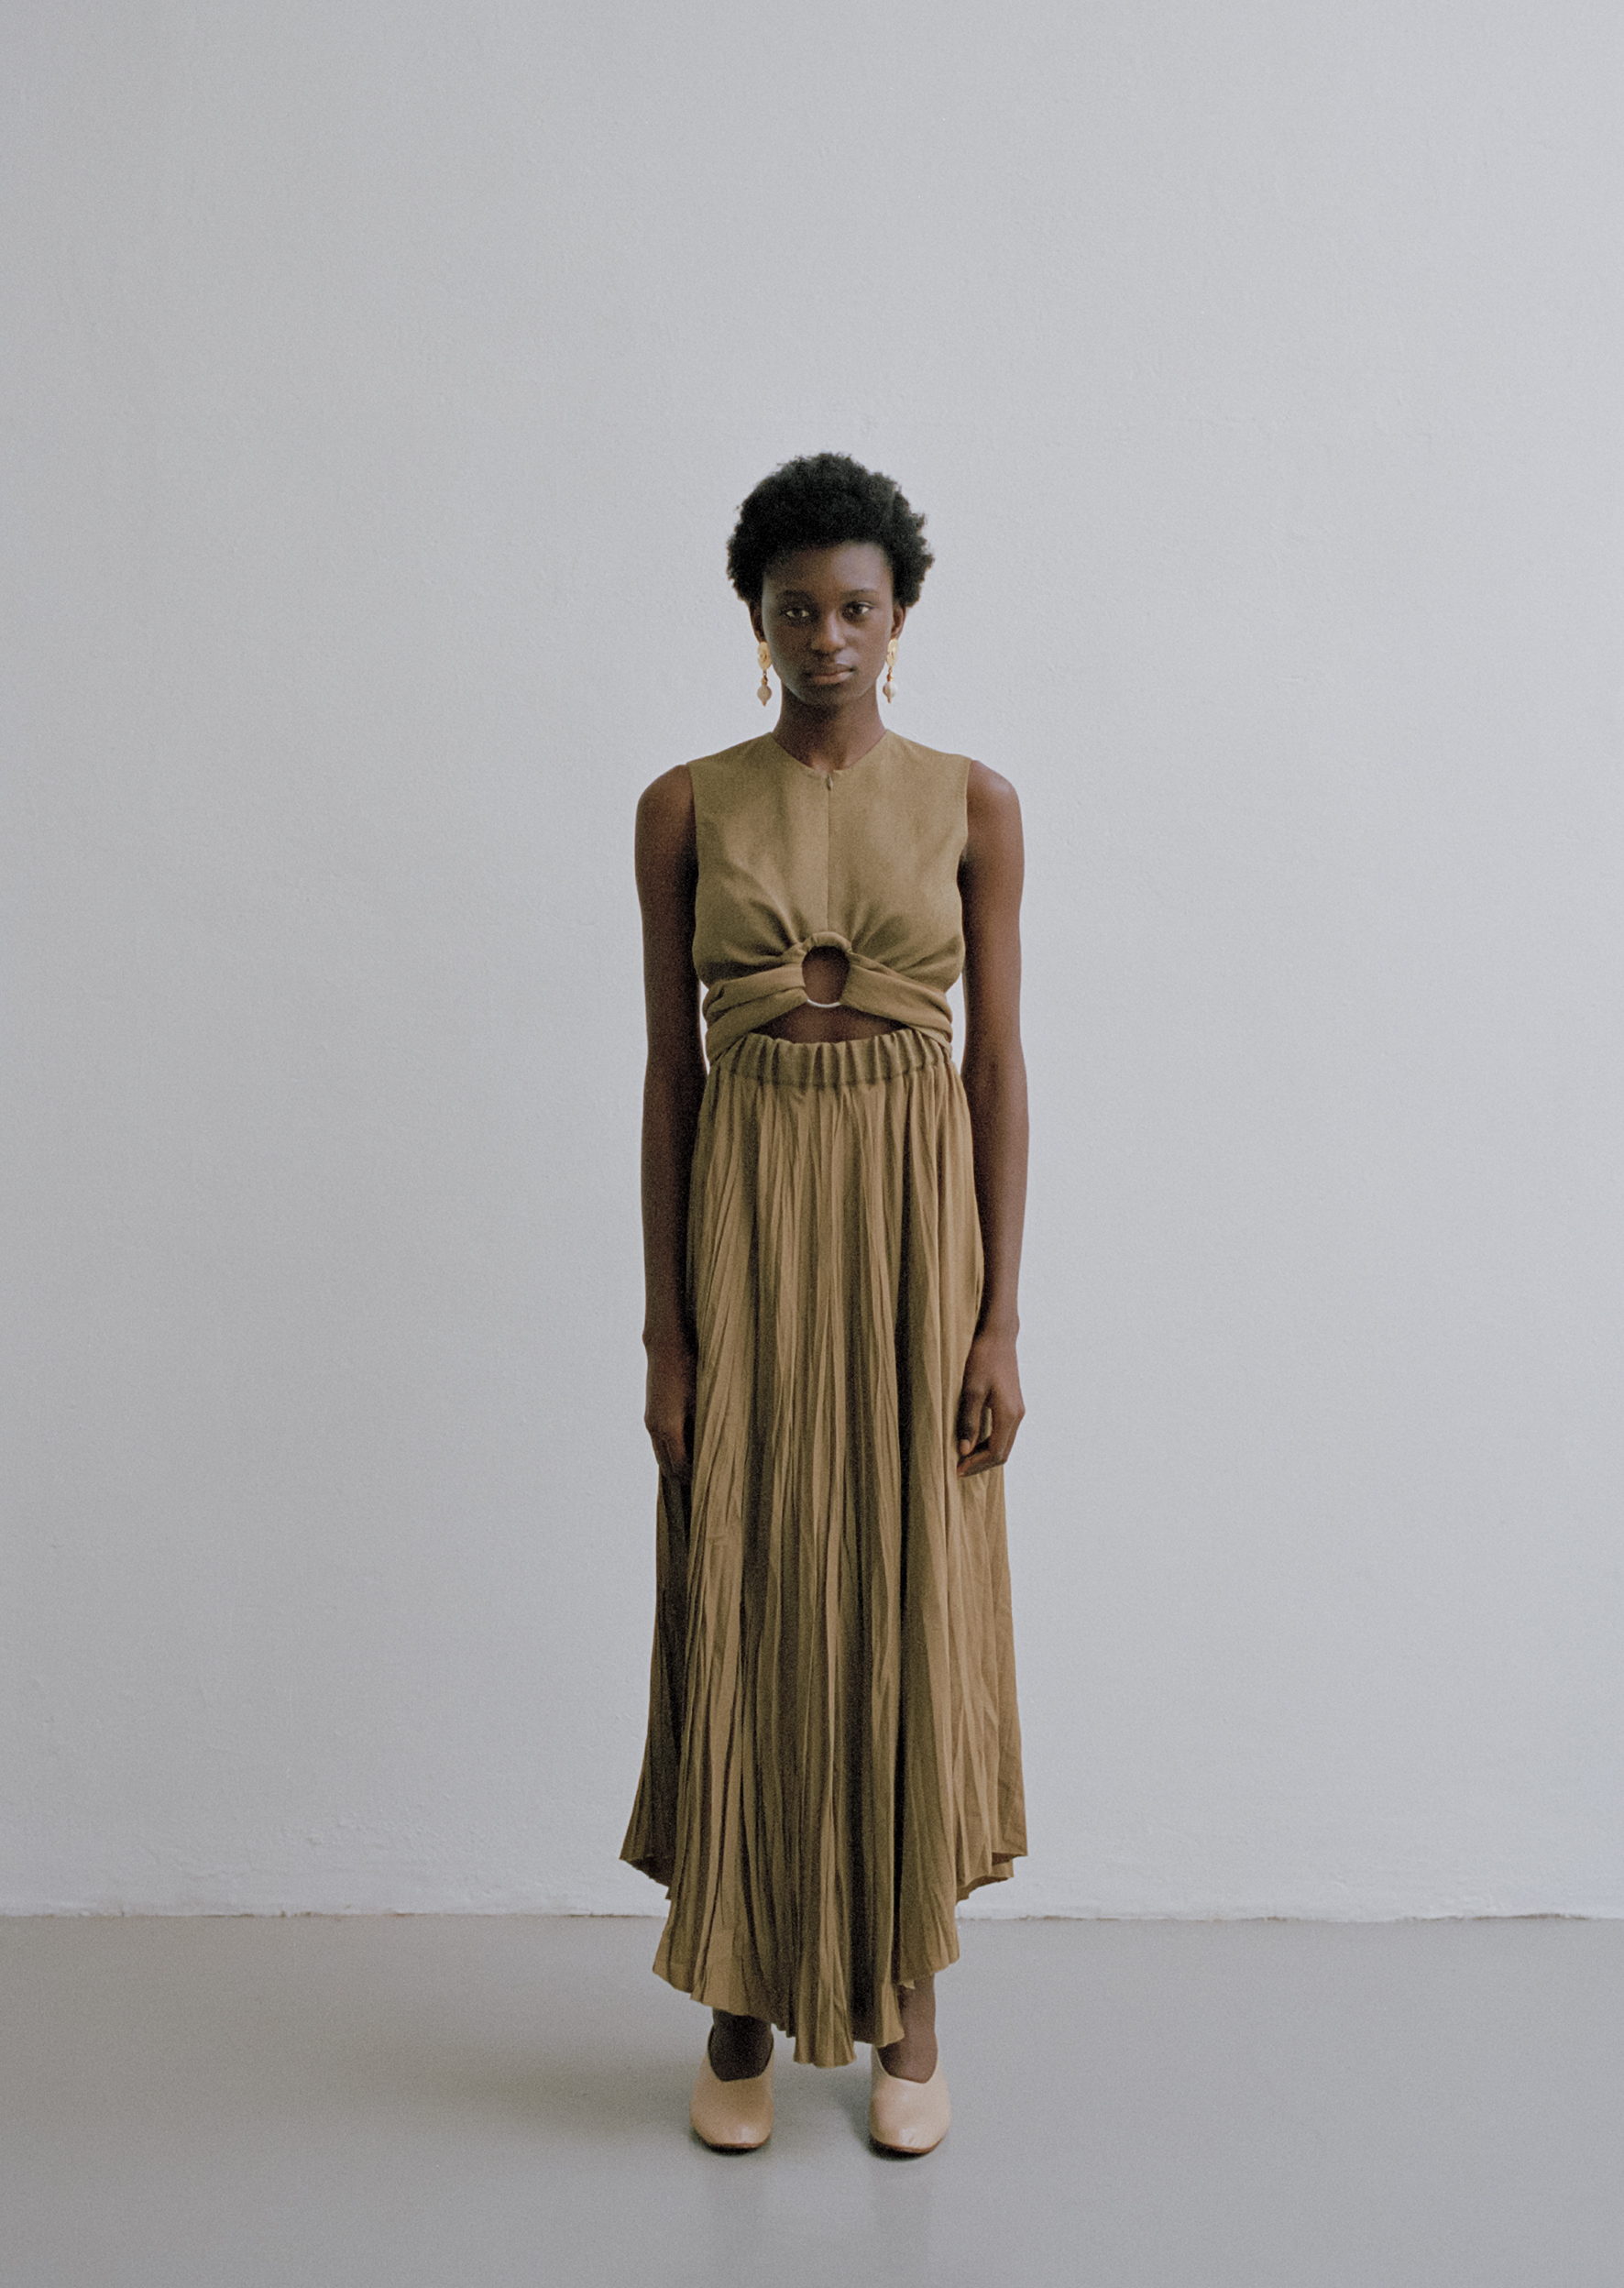  Raw linen and crush-pleated dress, golden pendant earrings MADAME PAULINE VINTAGE&nbsp; 